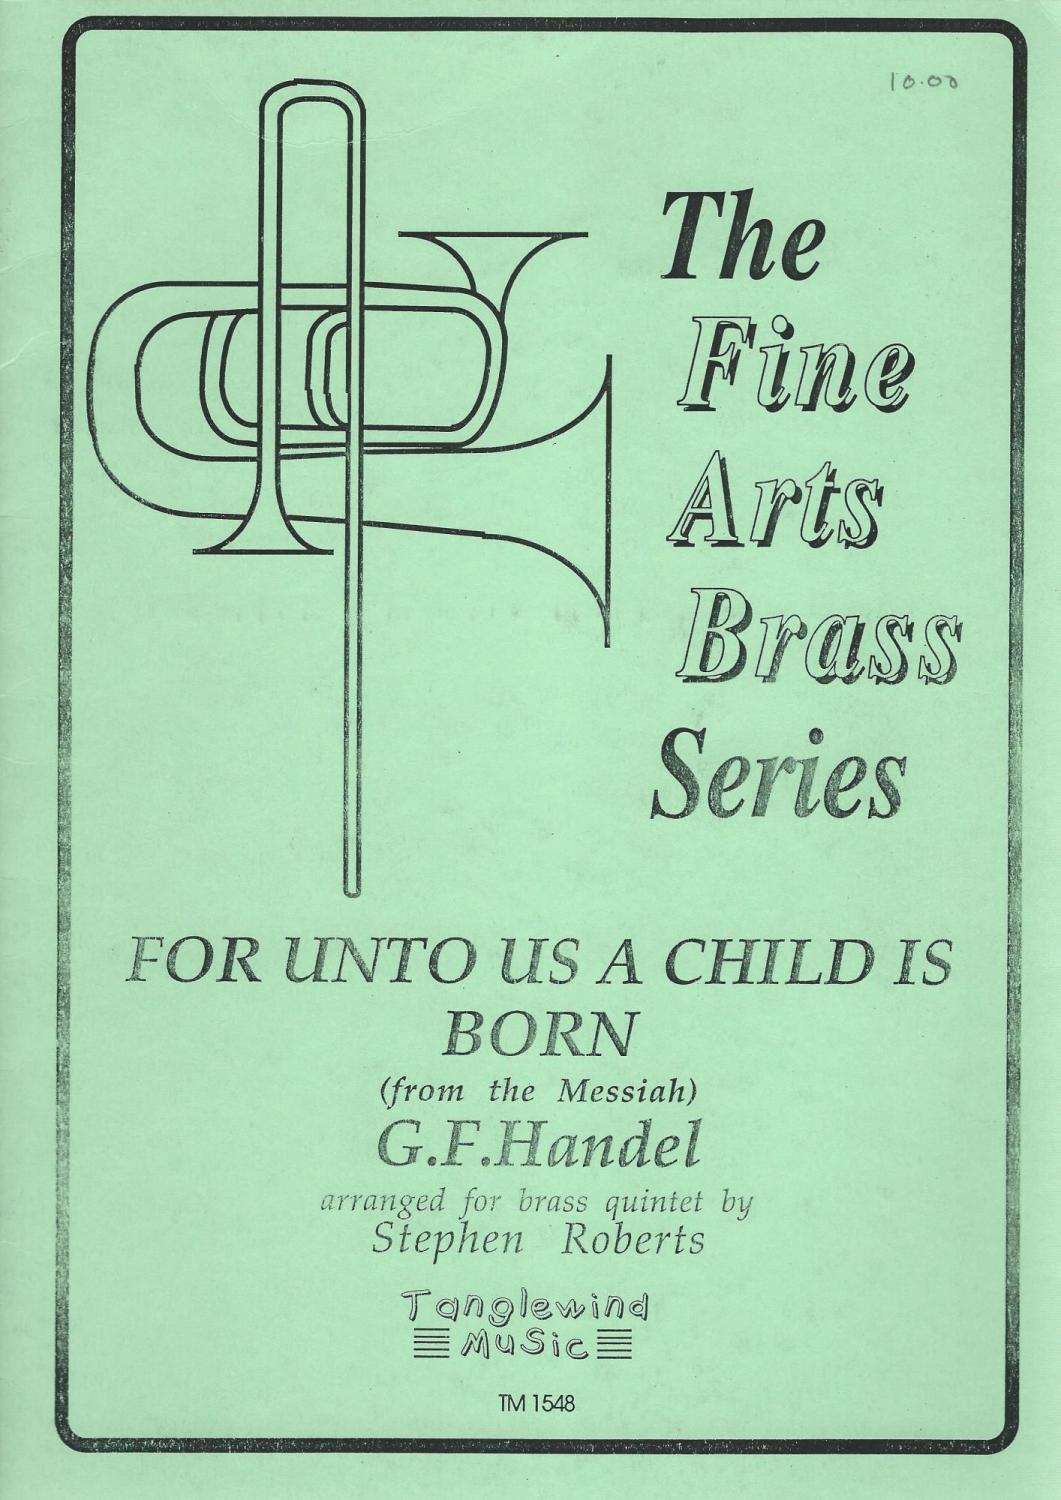 For Unto Us A Child Is Born (from the Messiah) for Brass Quintet - arr. Ste